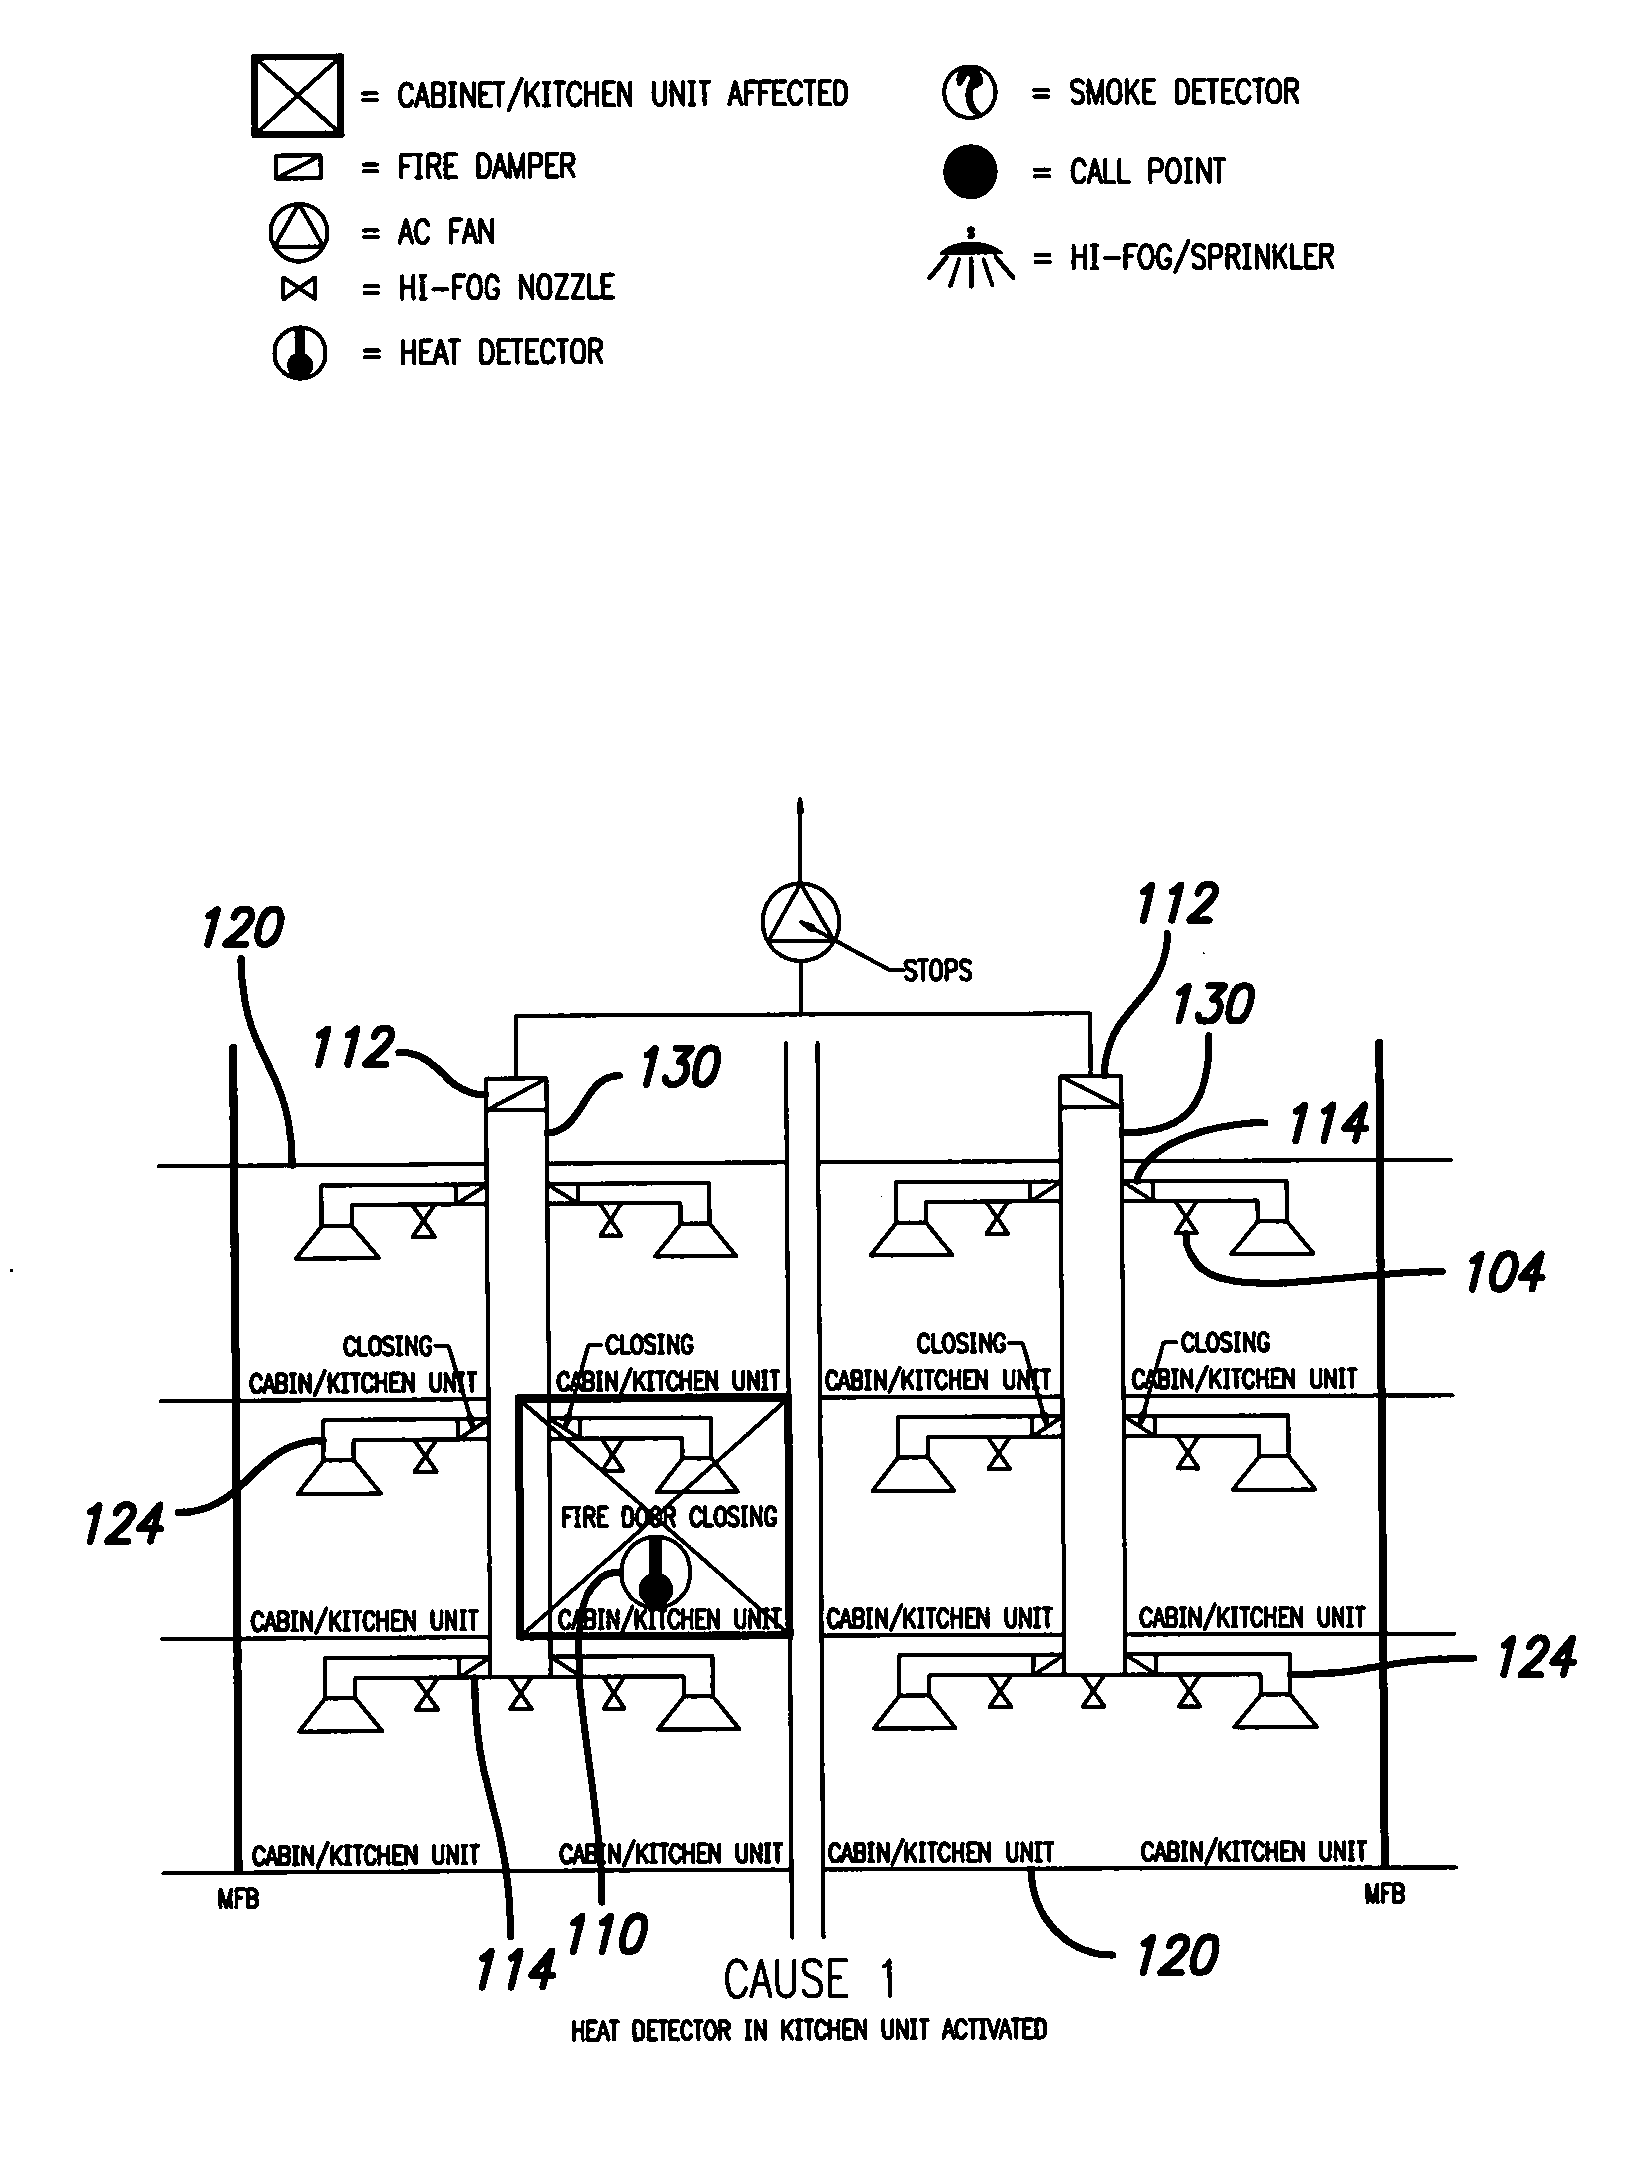 Fire containment and monitoring system